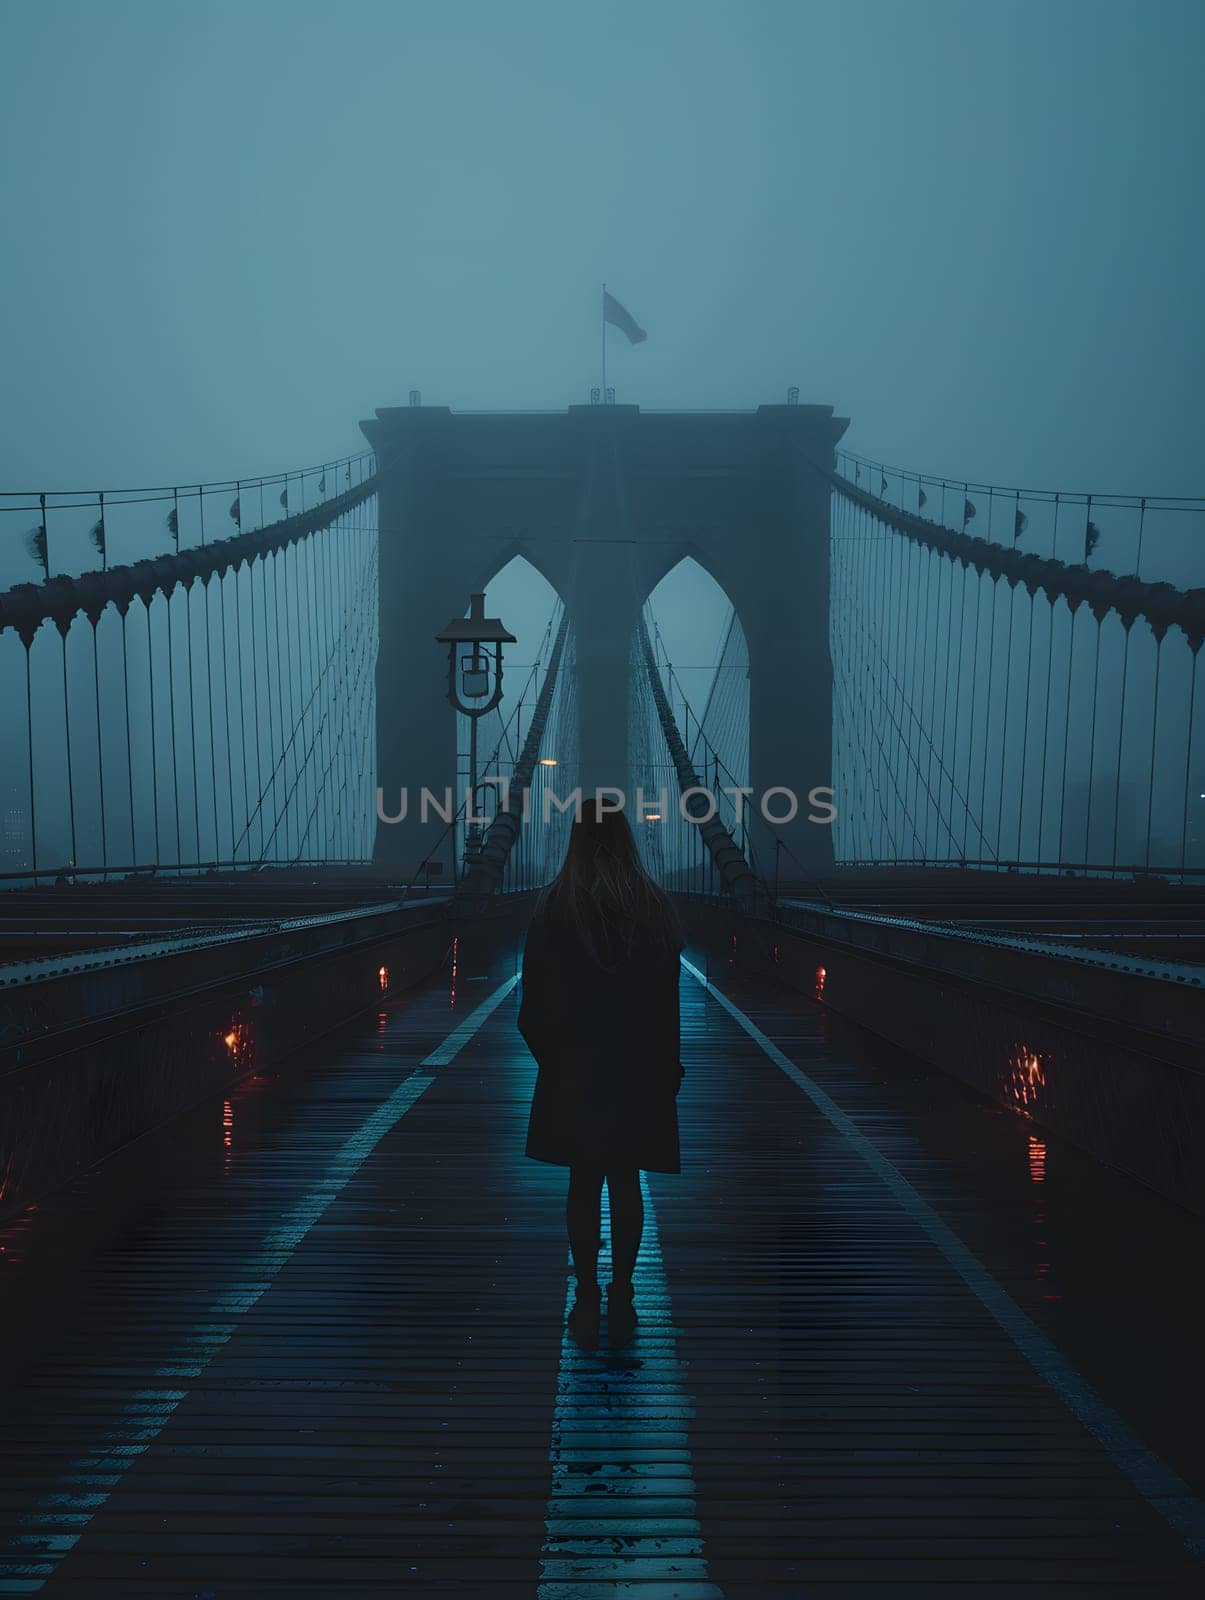 A woman is crossing a beam bridge on a foggy day, surrounded by darkness and limited visibility. The symmetrical structure of the bridge contrasts with the obscured sky and road